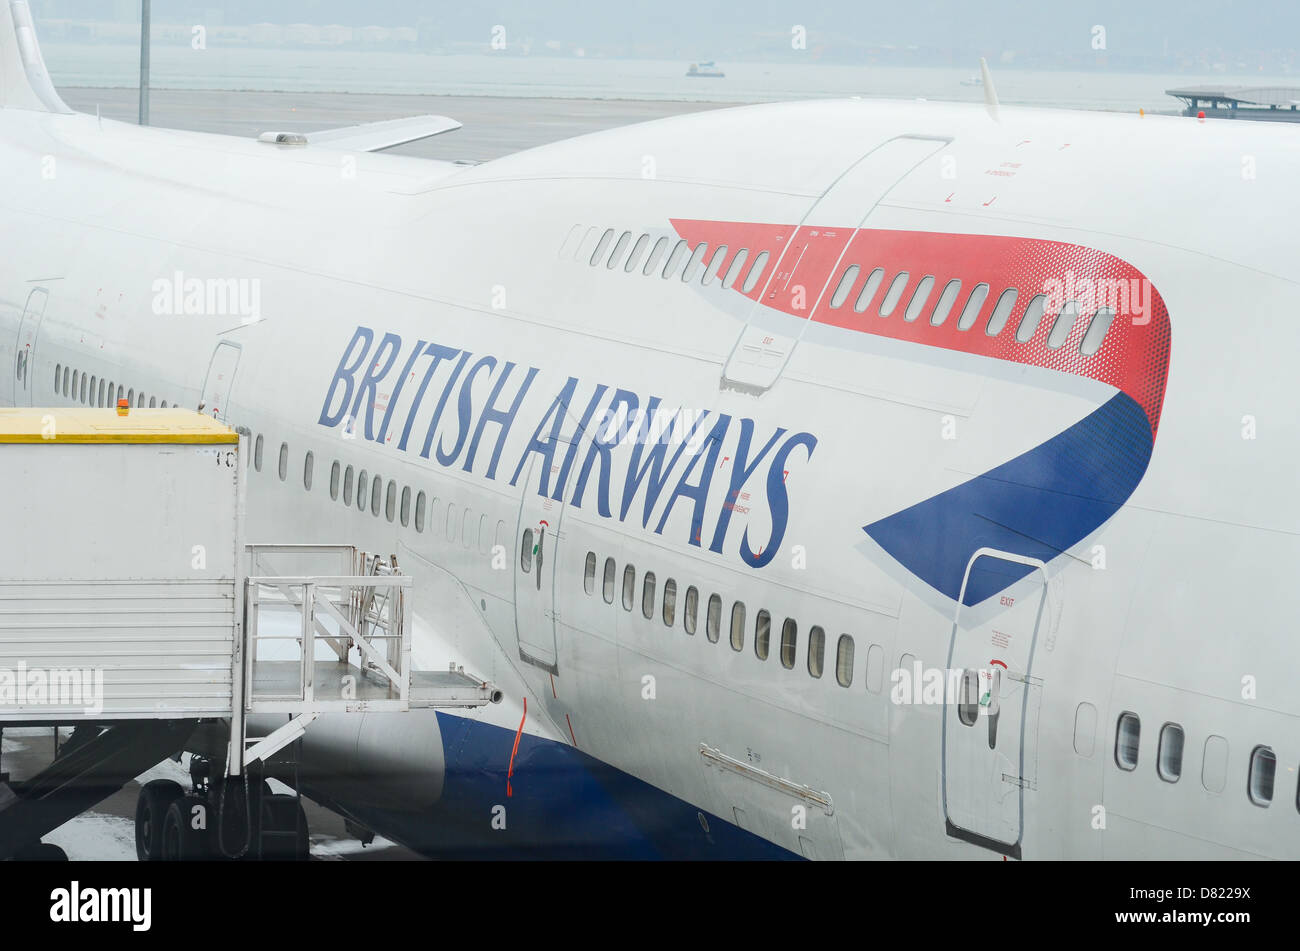 The side of a British Airways passenger plane. Stock Photo